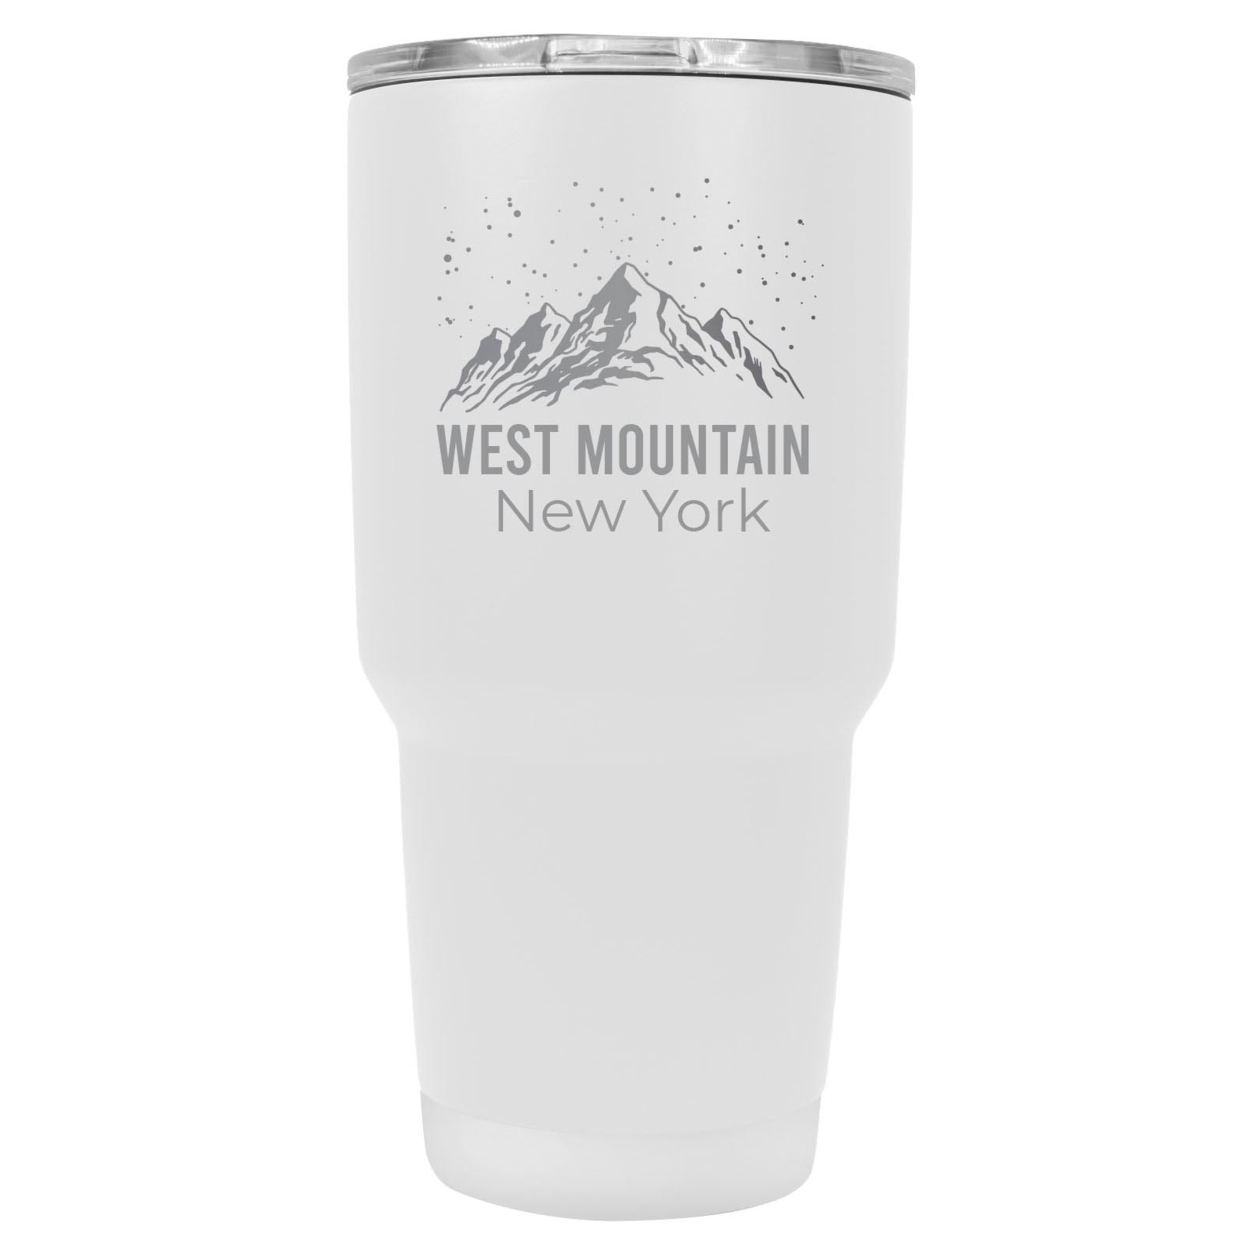 West Mountain New York Ski Snowboard Winter Souvenir Laser Engraved 24 Oz Insulated Stainless Steel Tumbler - Red